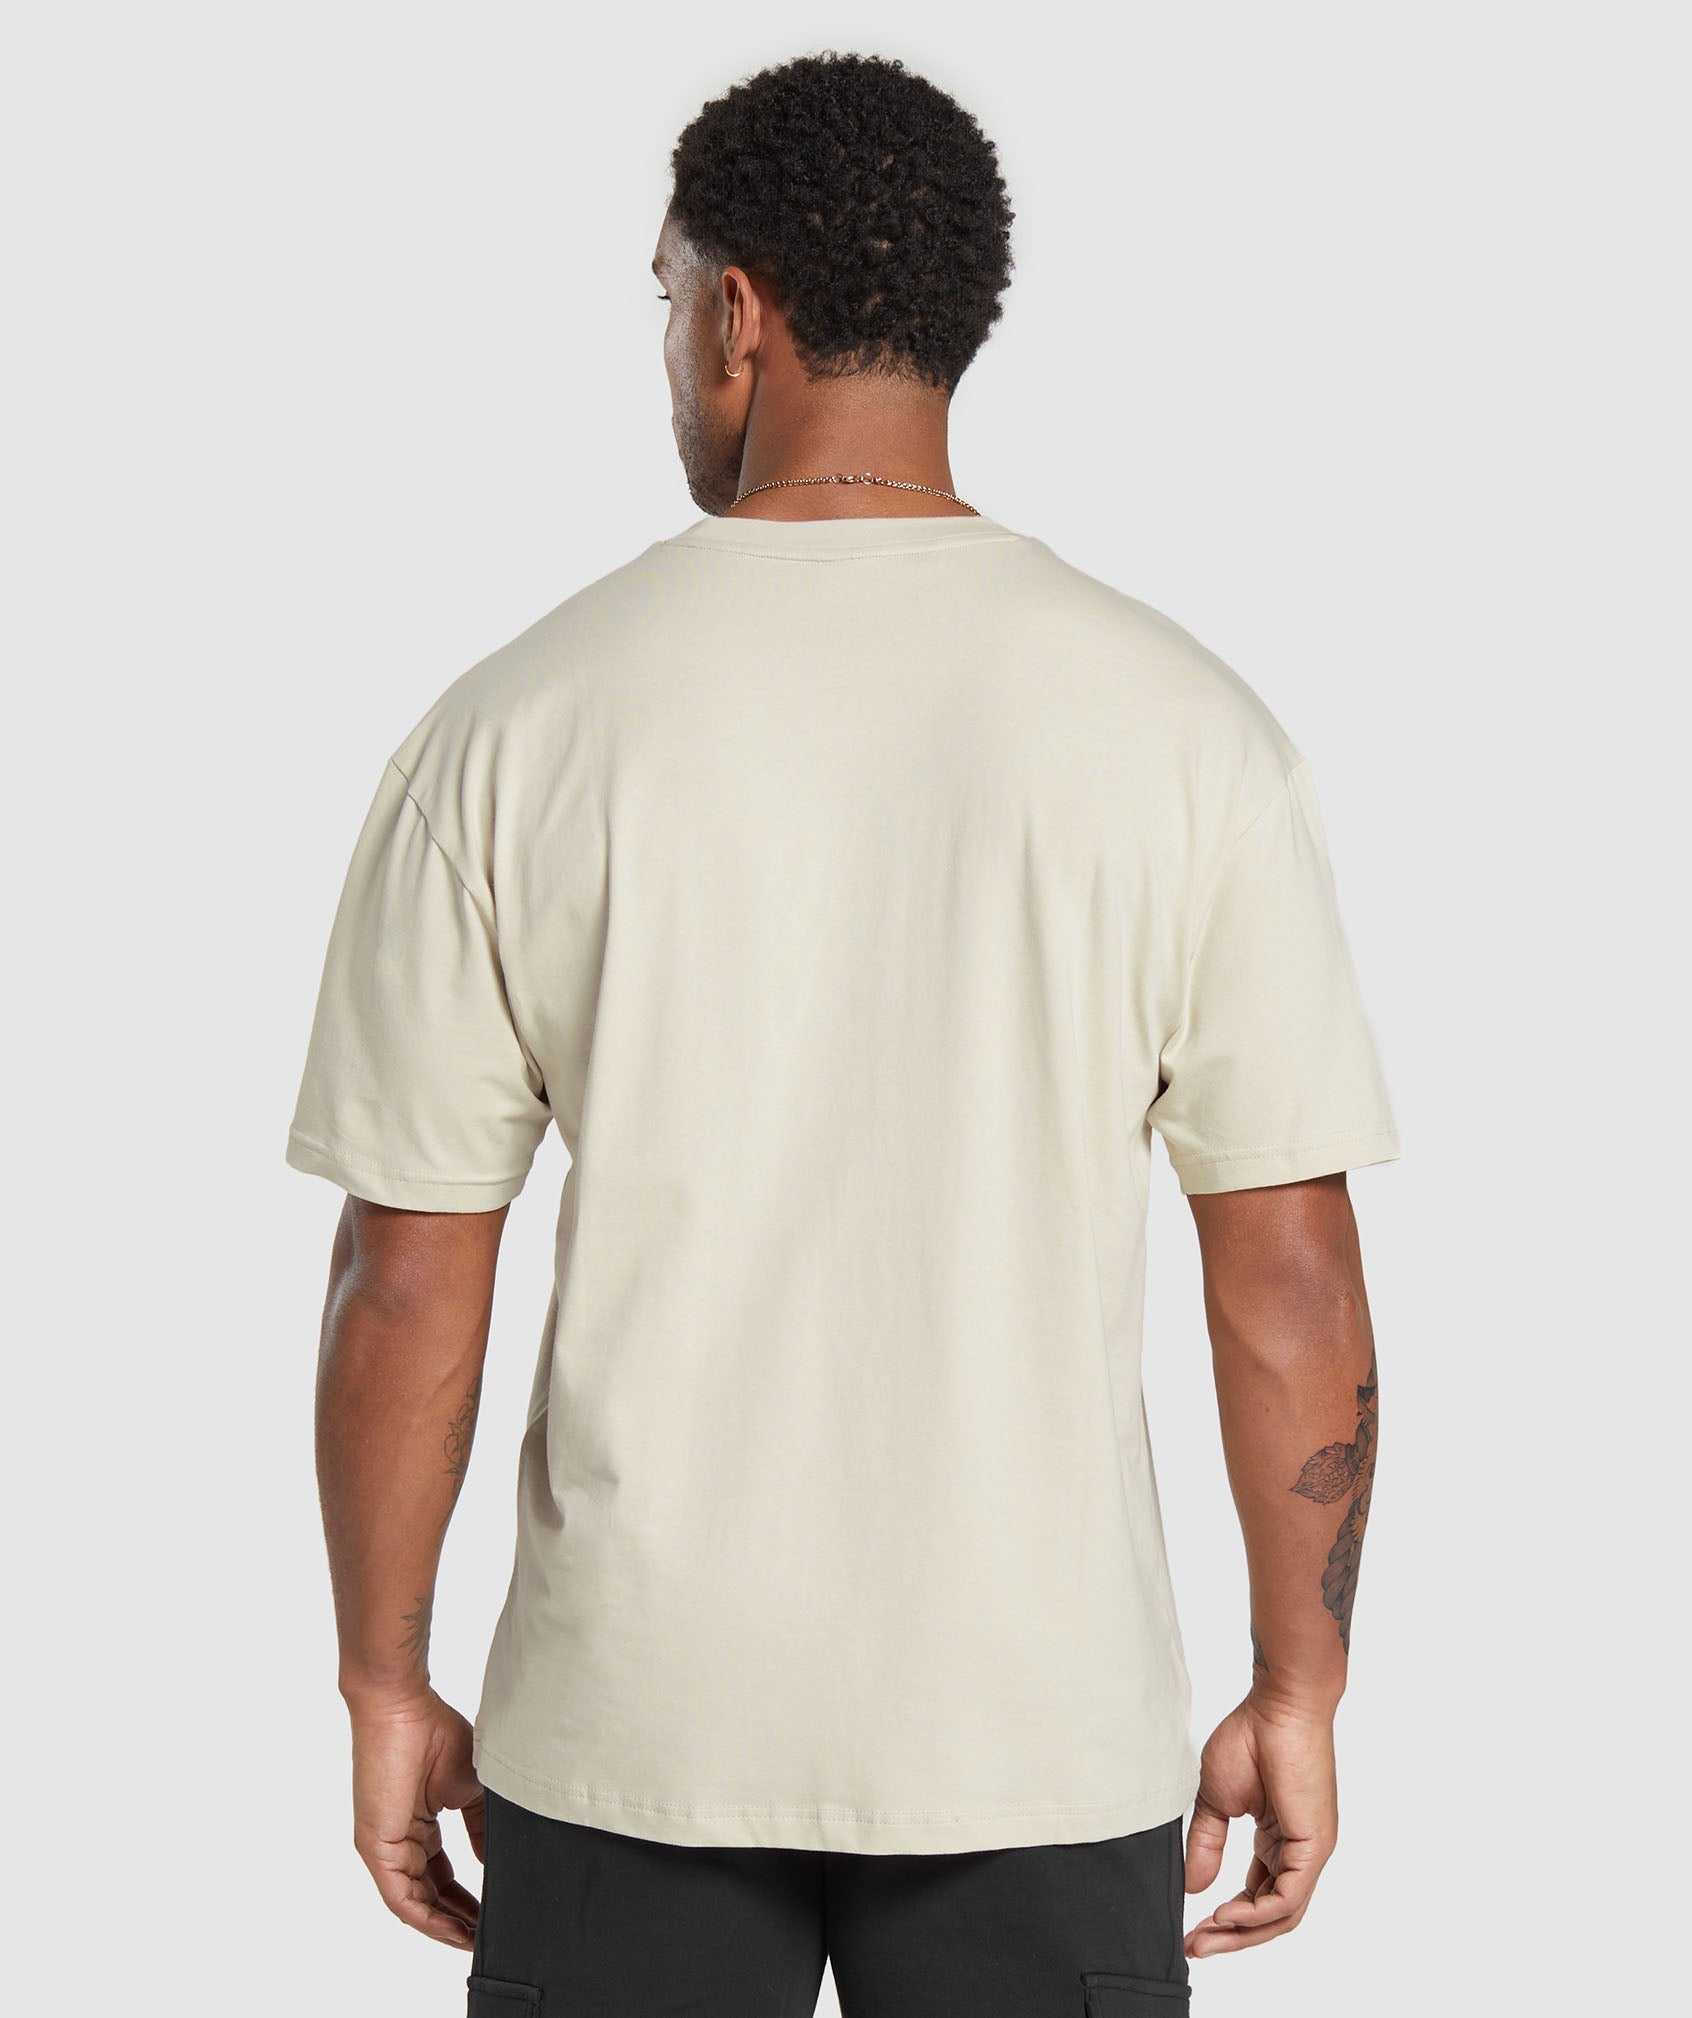 Essential Oversized T-Shirt in Pebble Grey - view 2